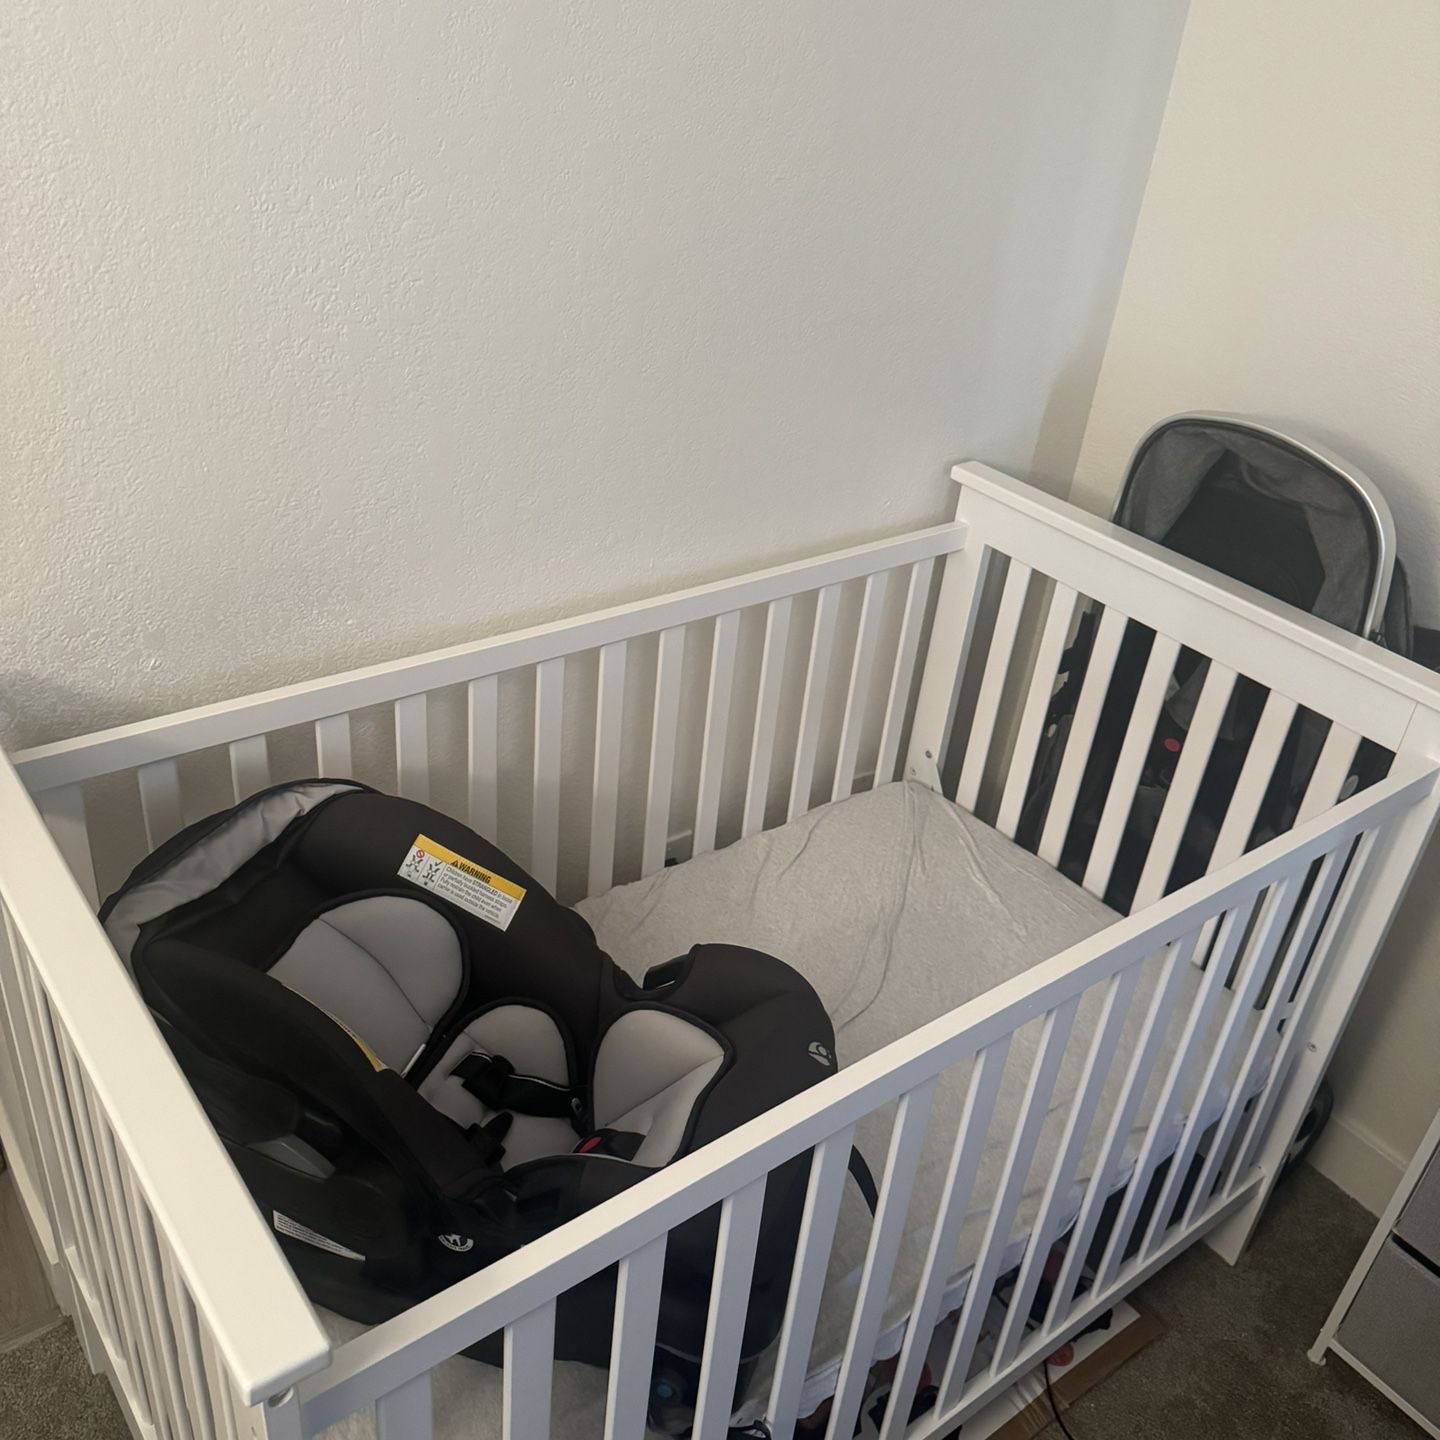 Baby Crib, Stroller, and Car Seat